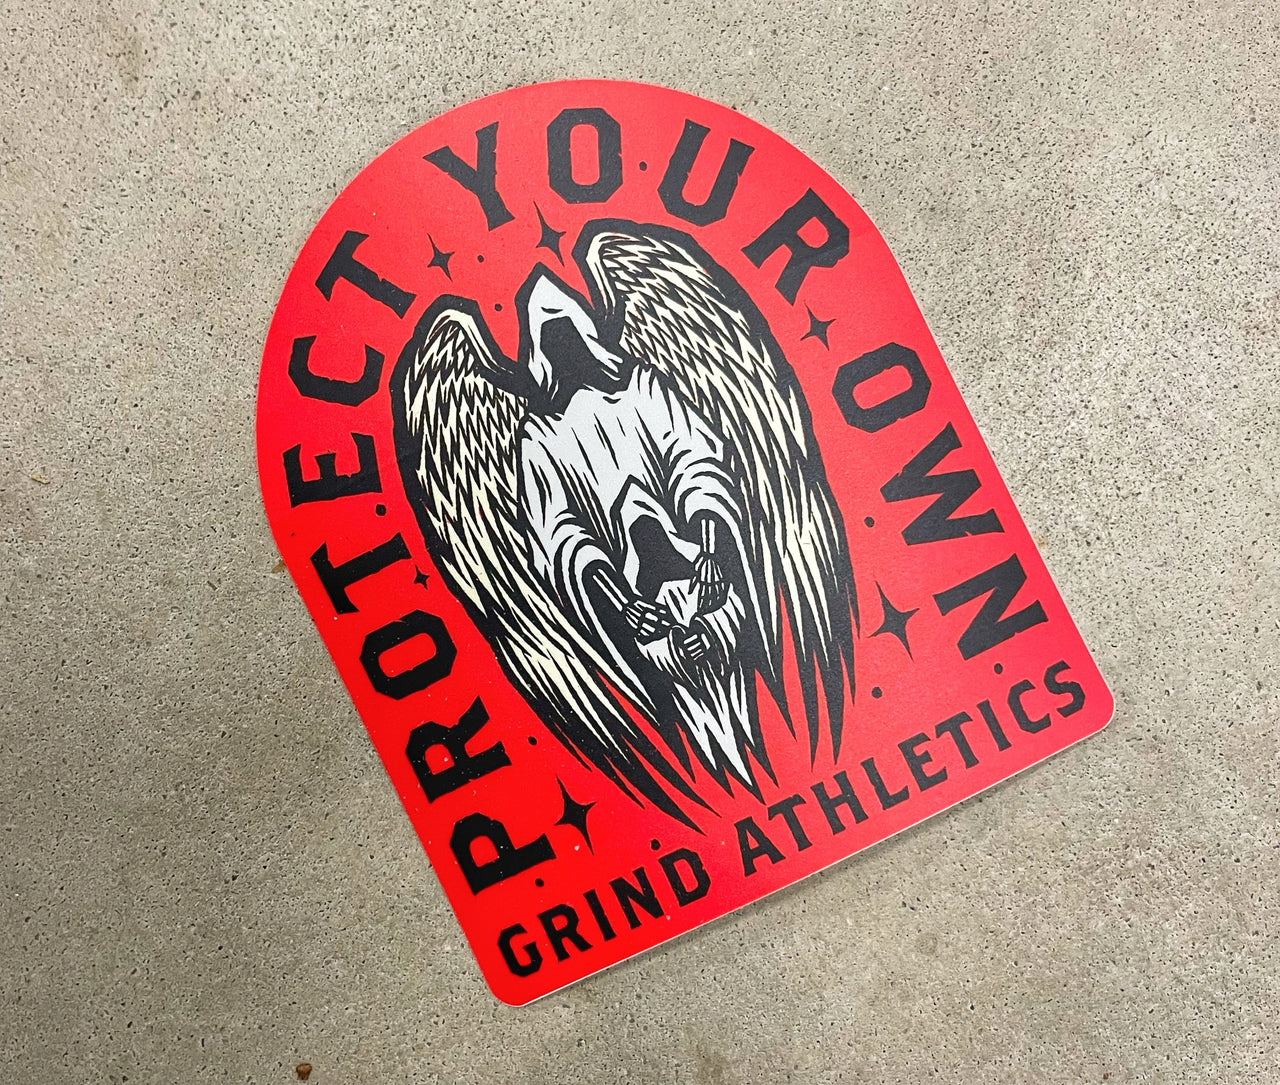 The Grind Athletics Protect Your Own - Sticker